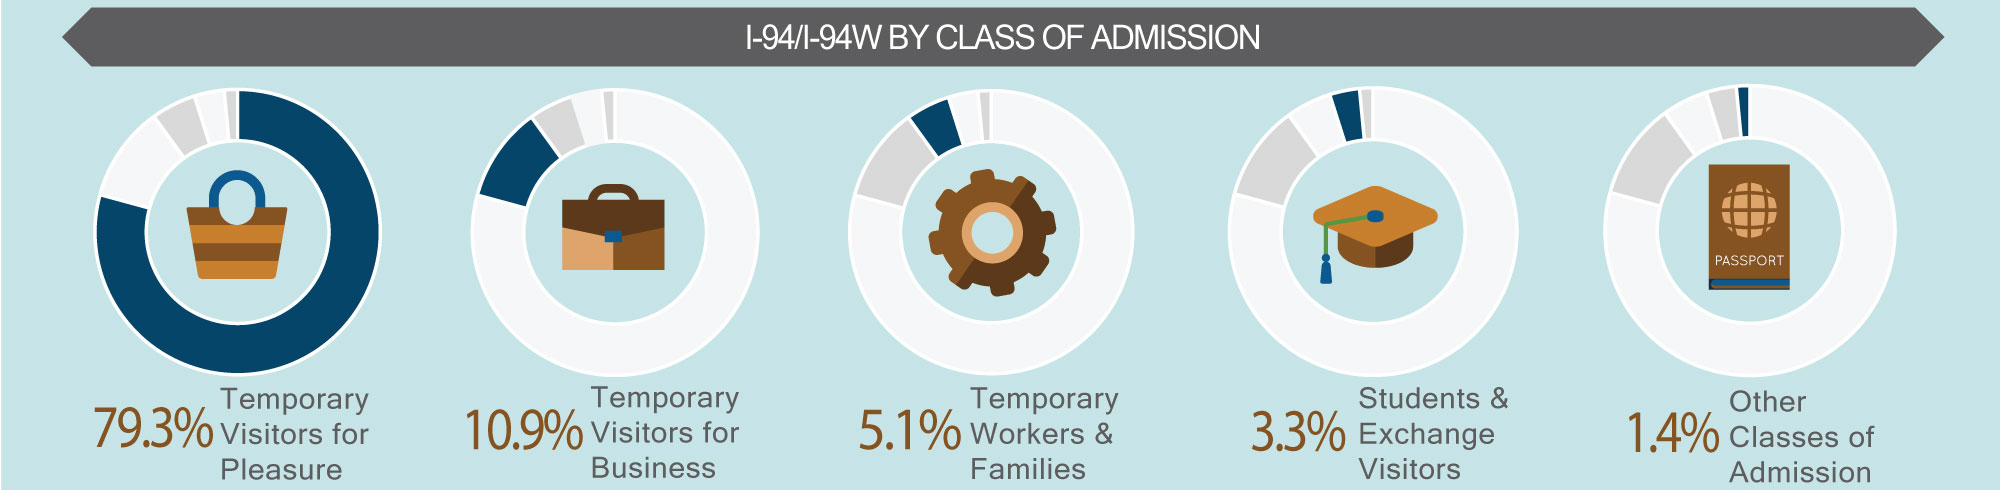 I-94/I-94W by class of admission. Temporary visitors for pleasure, 79.3%; Temporary visitors for business, 10.9%; Temporary workers & families, 5.1%; Students & Exchange visitors, 3.3%; Other classes of admission, 1.4%.